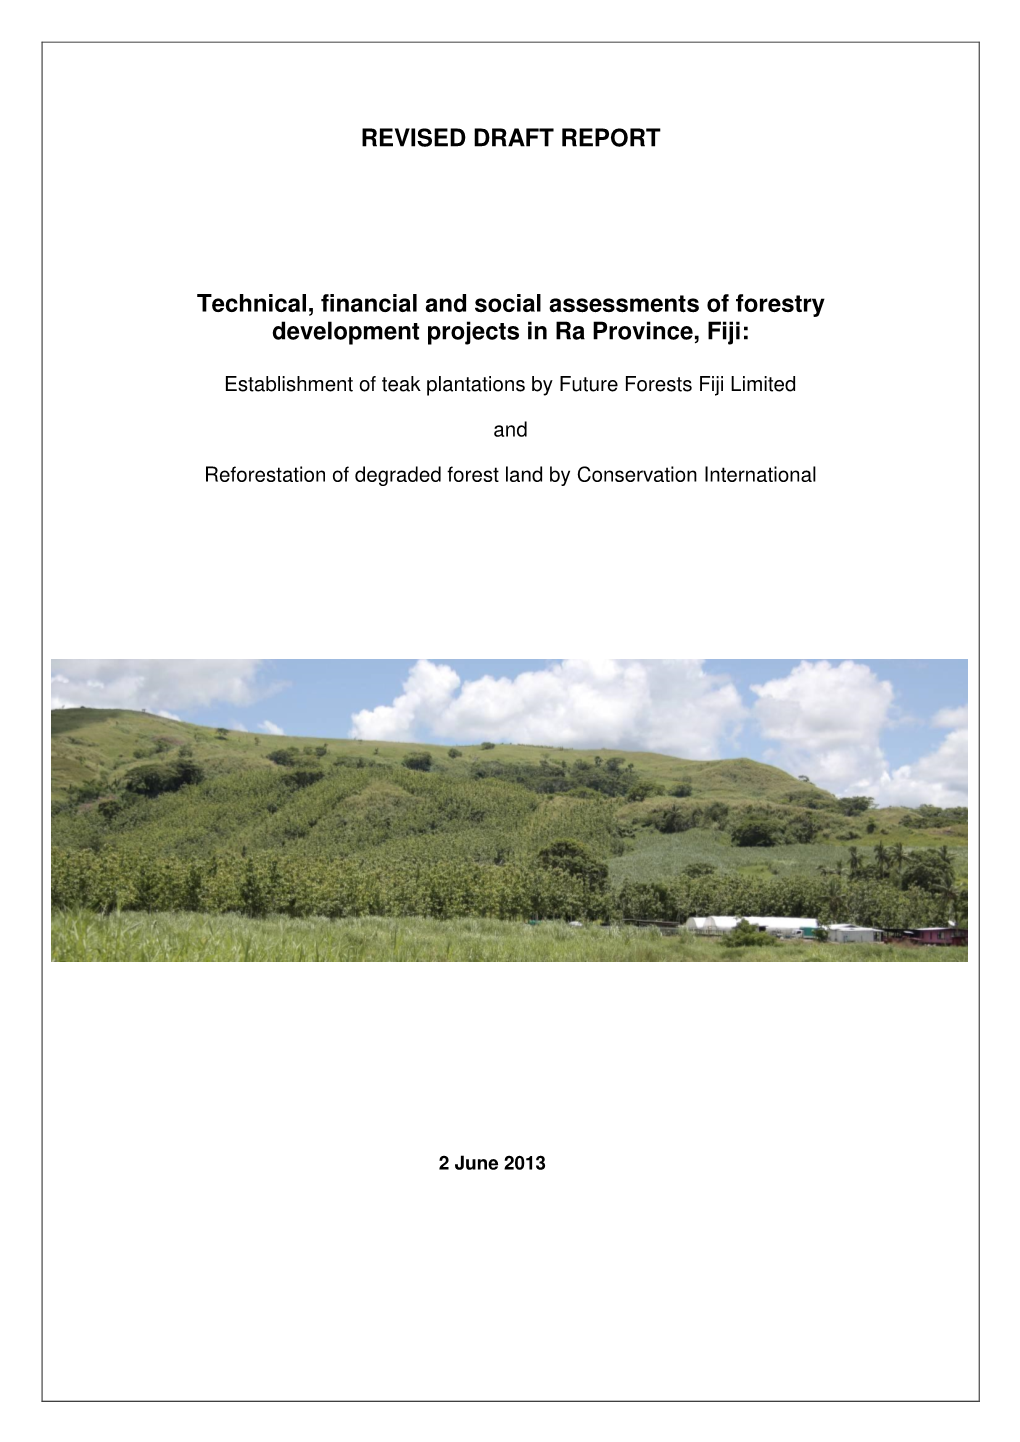 Technical, Financial and Social Assessments of Forestry Development Projects in Ra Province, Fiji